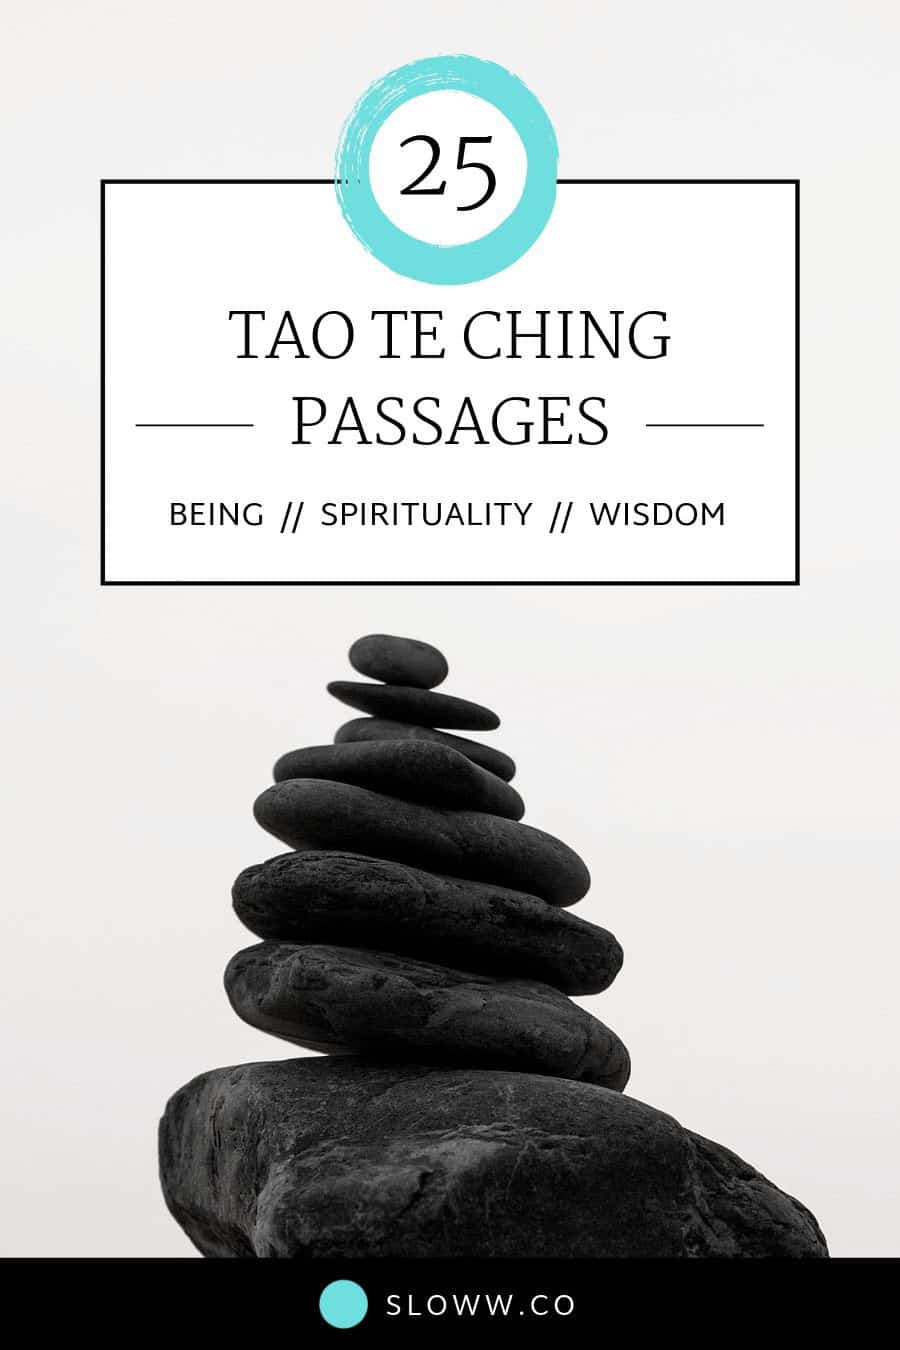 Tao Te Ching - Connecting To Your True Source Of Power